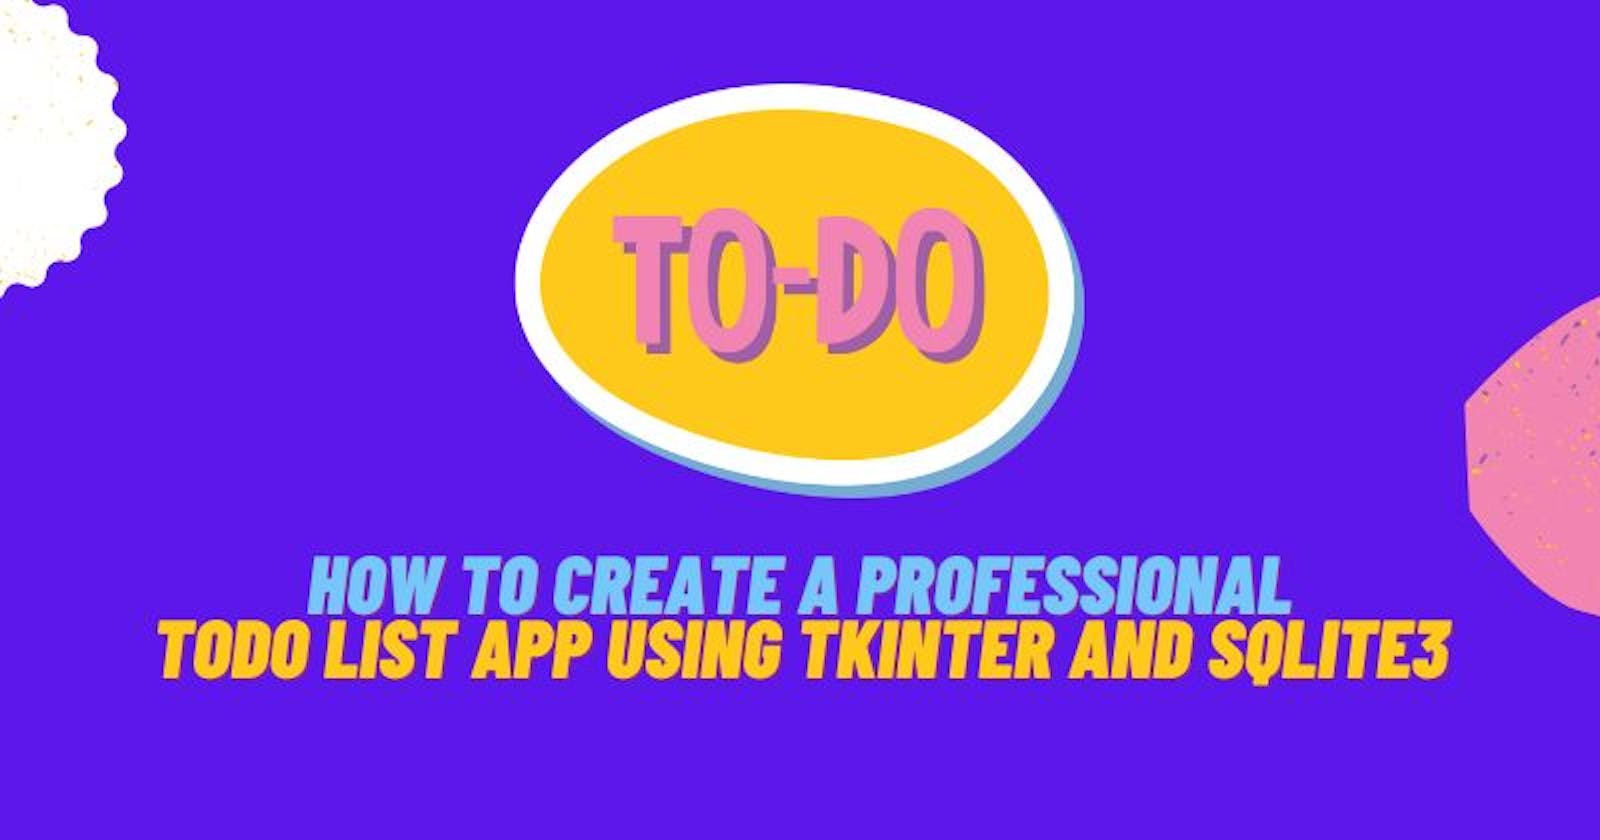 How to create a professional ToDo List app using Tkinter and SQLite3